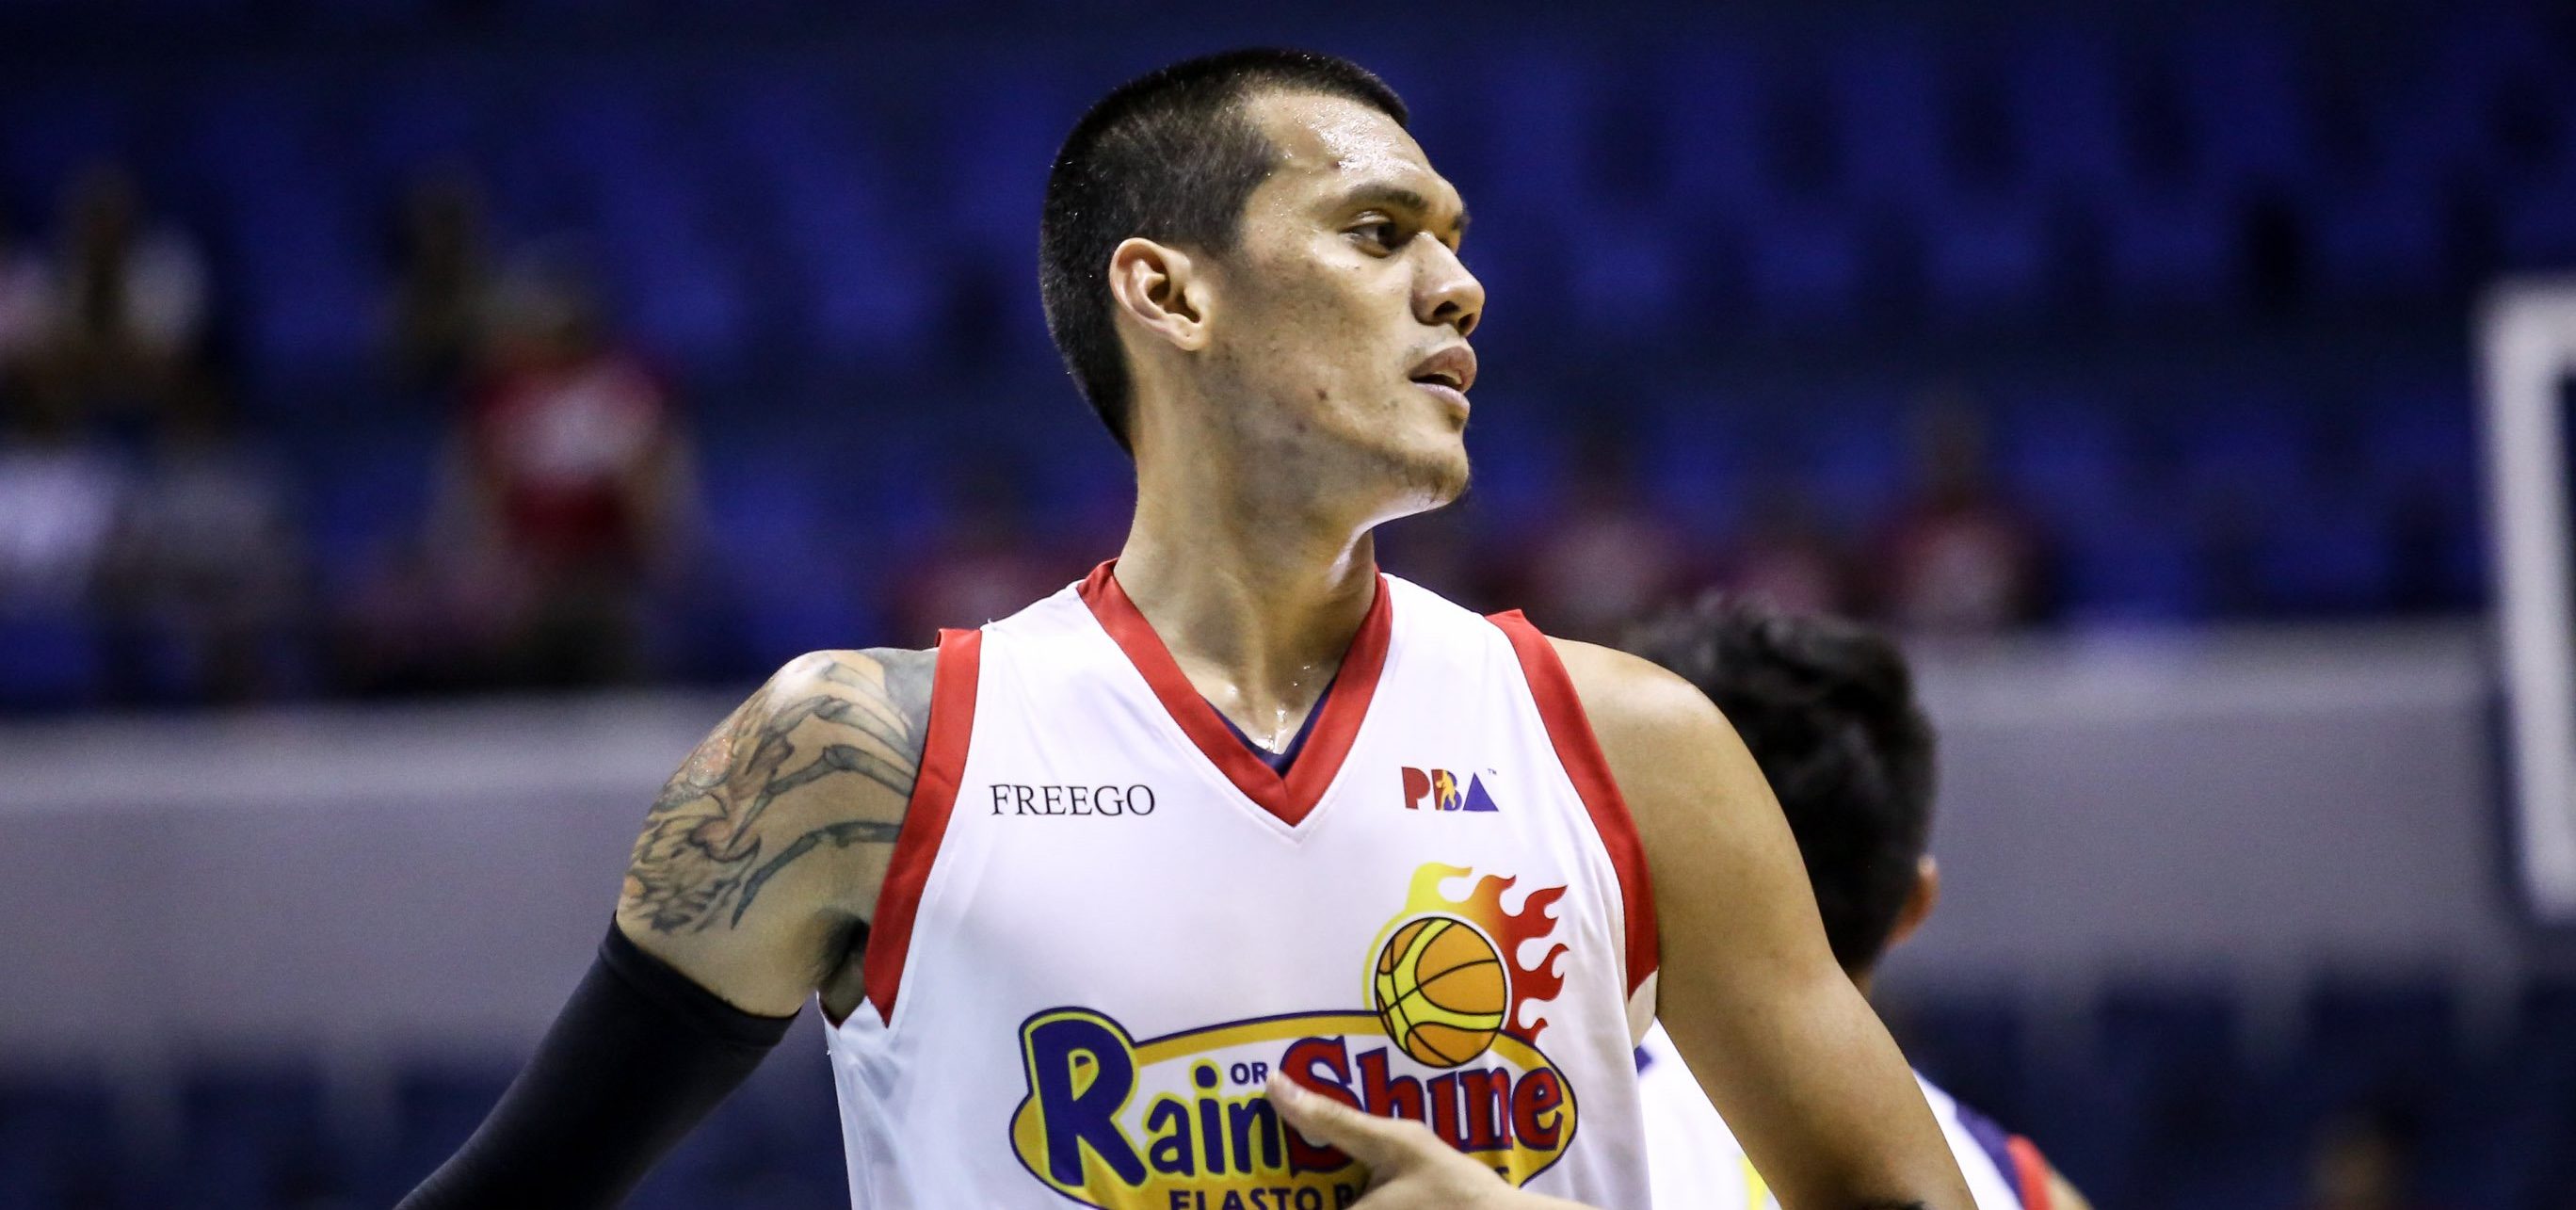 With new career best, Almazan credits coach for giving him confidence ...